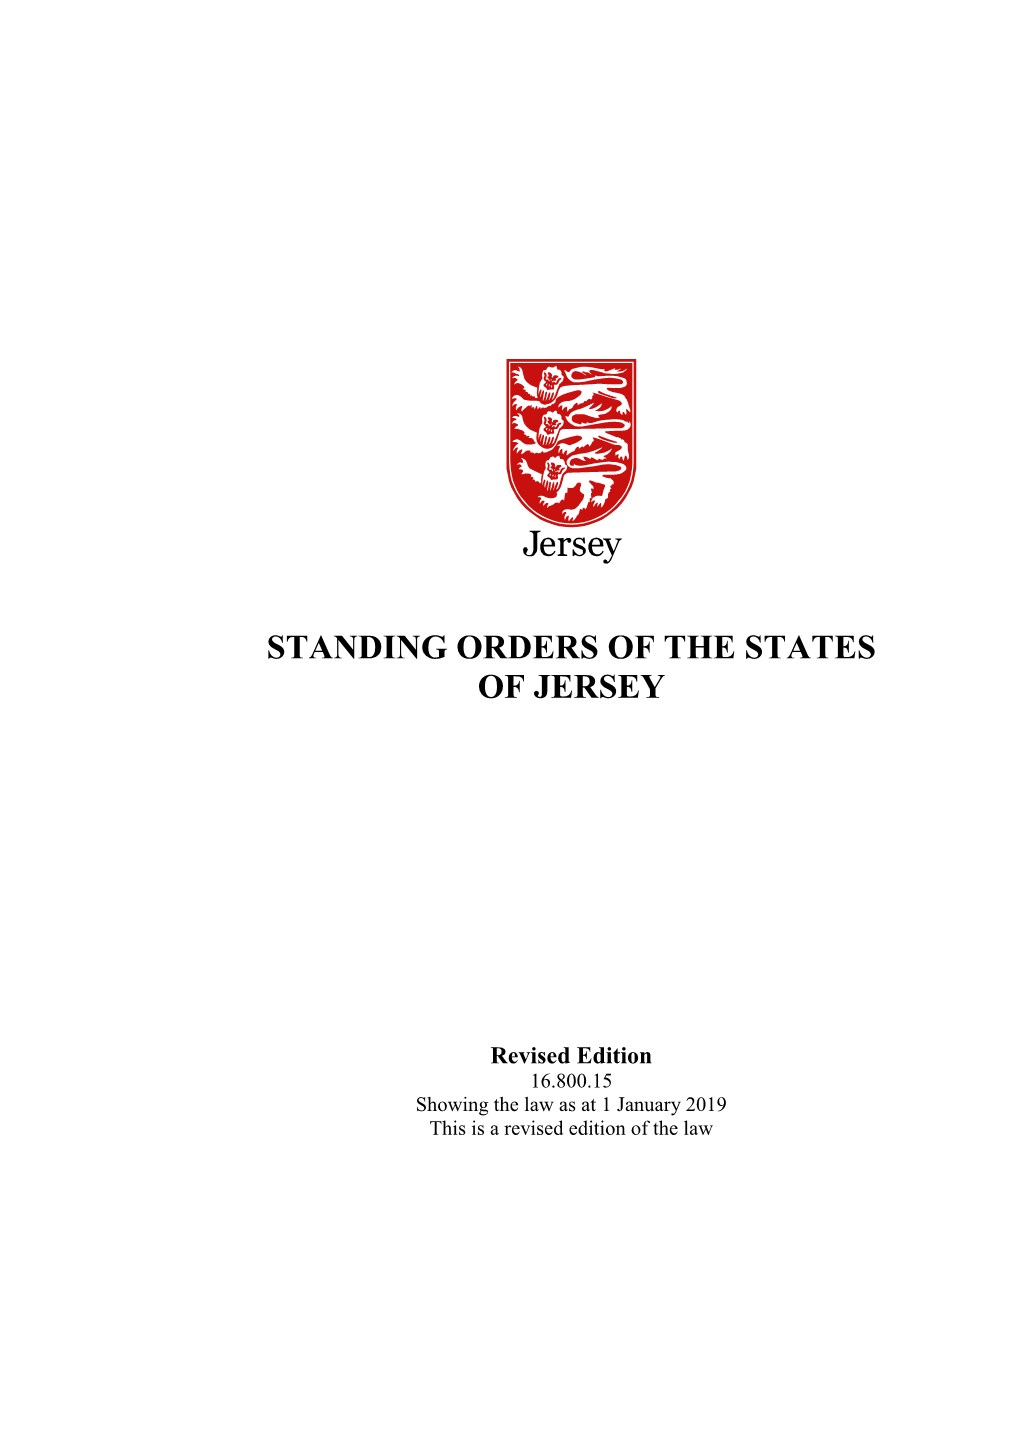 Standing Orders of the States of Jersey